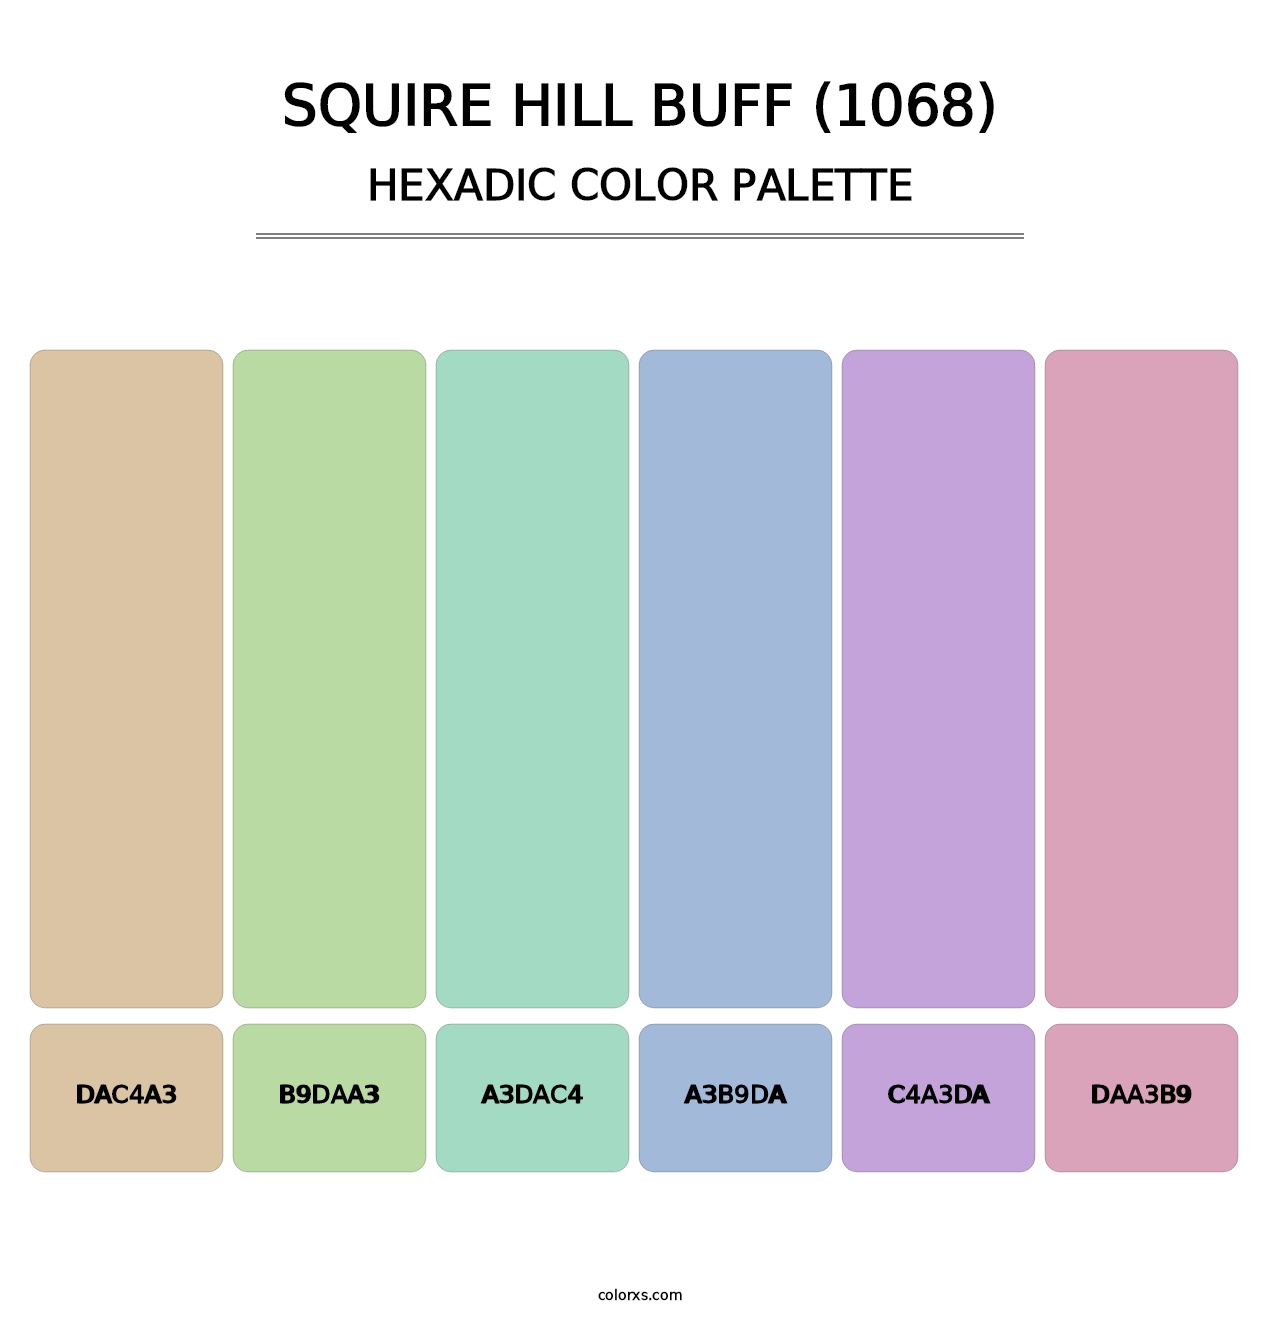 Squire Hill Buff (1068) - Hexadic Color Palette